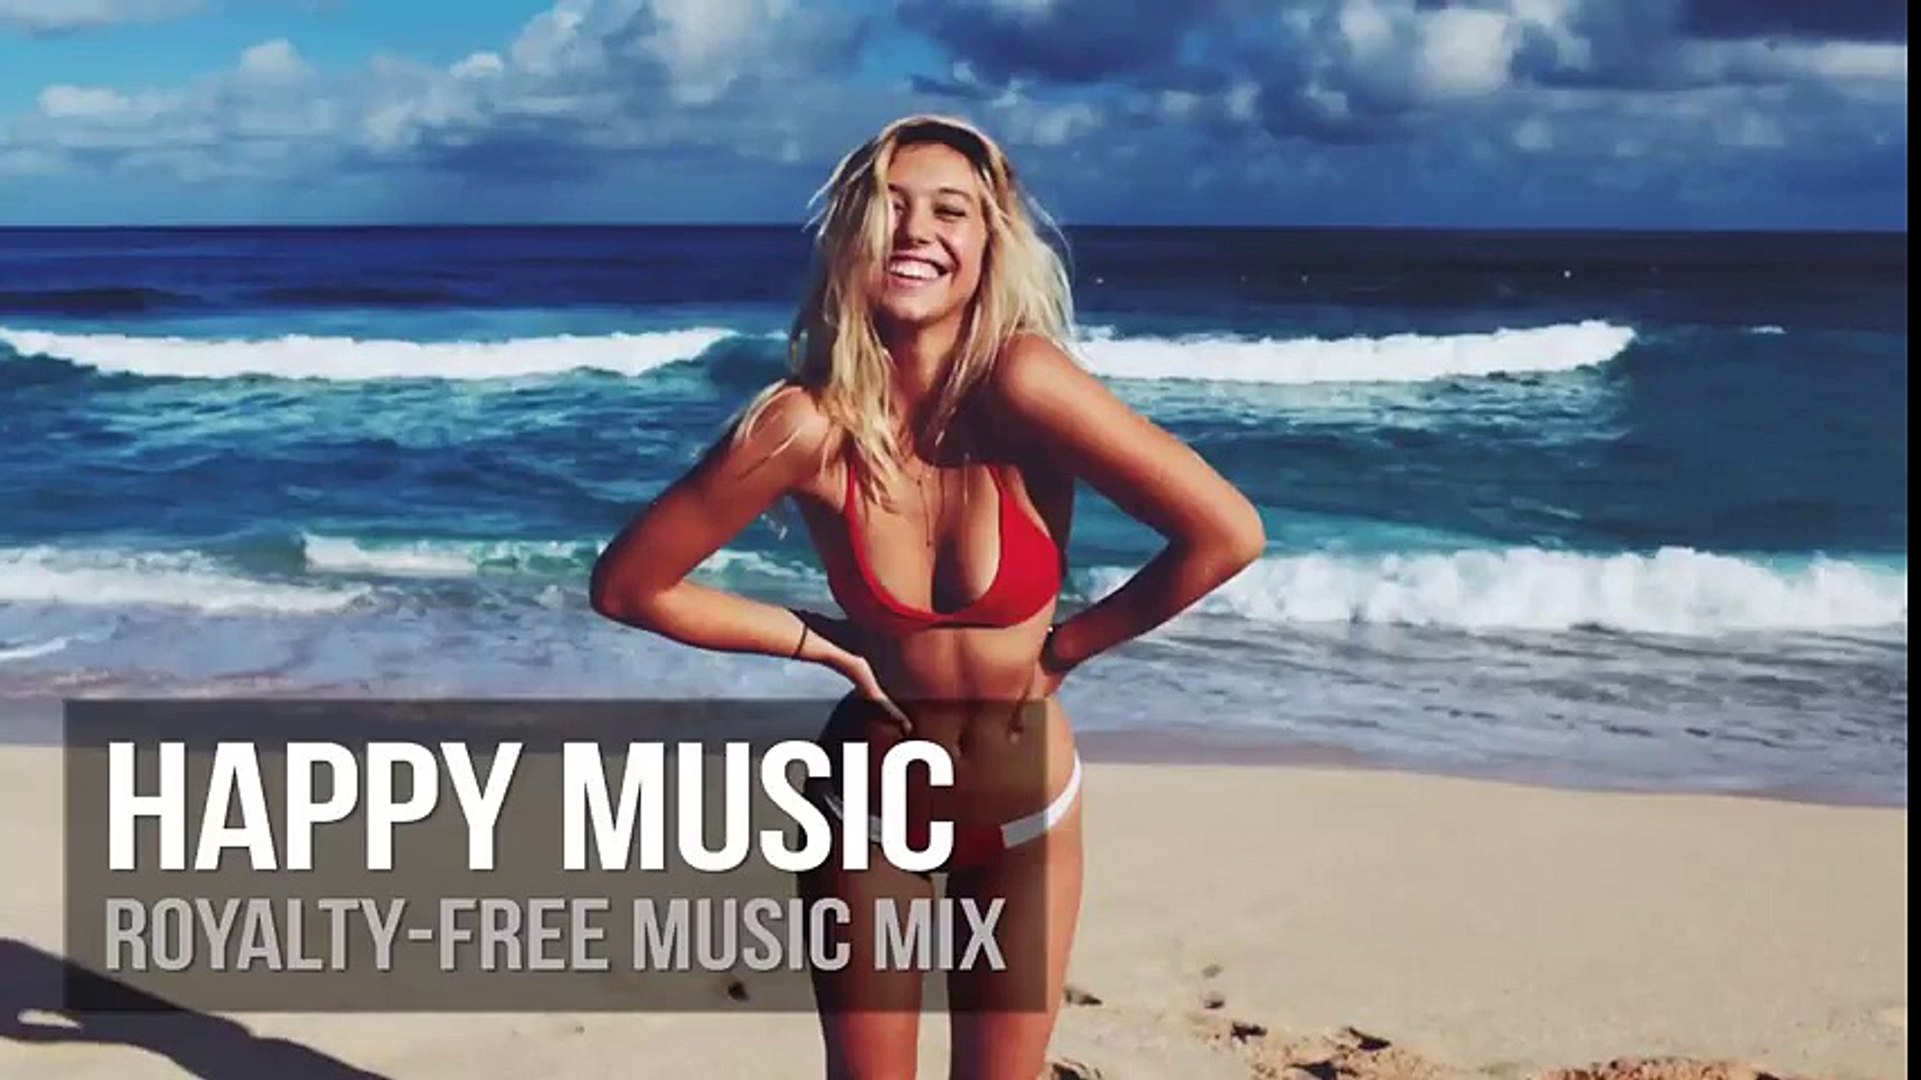 ★ Happy Background Music Mix ★ Royalty Free   Music for Videos   Instrumental